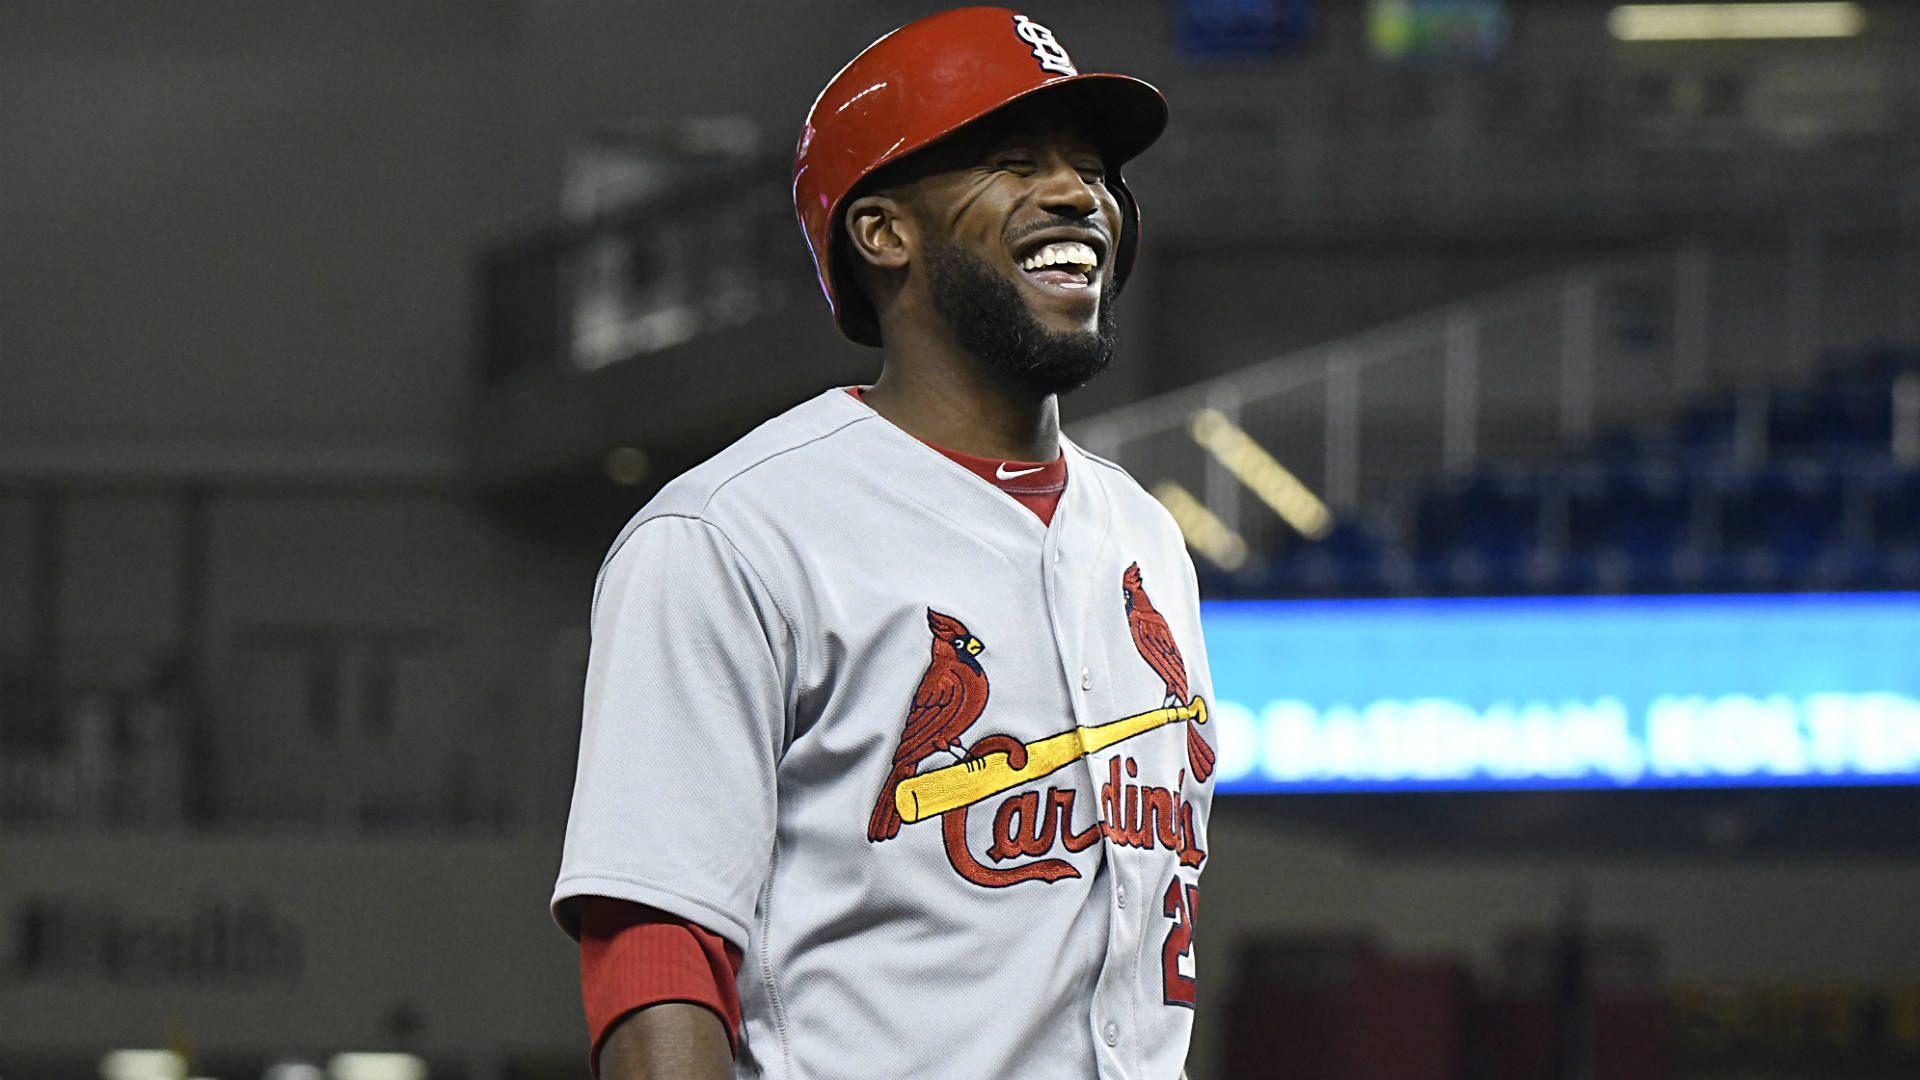 Dexter Fowler content with quieter role in Cardinals clubhouse. MLB